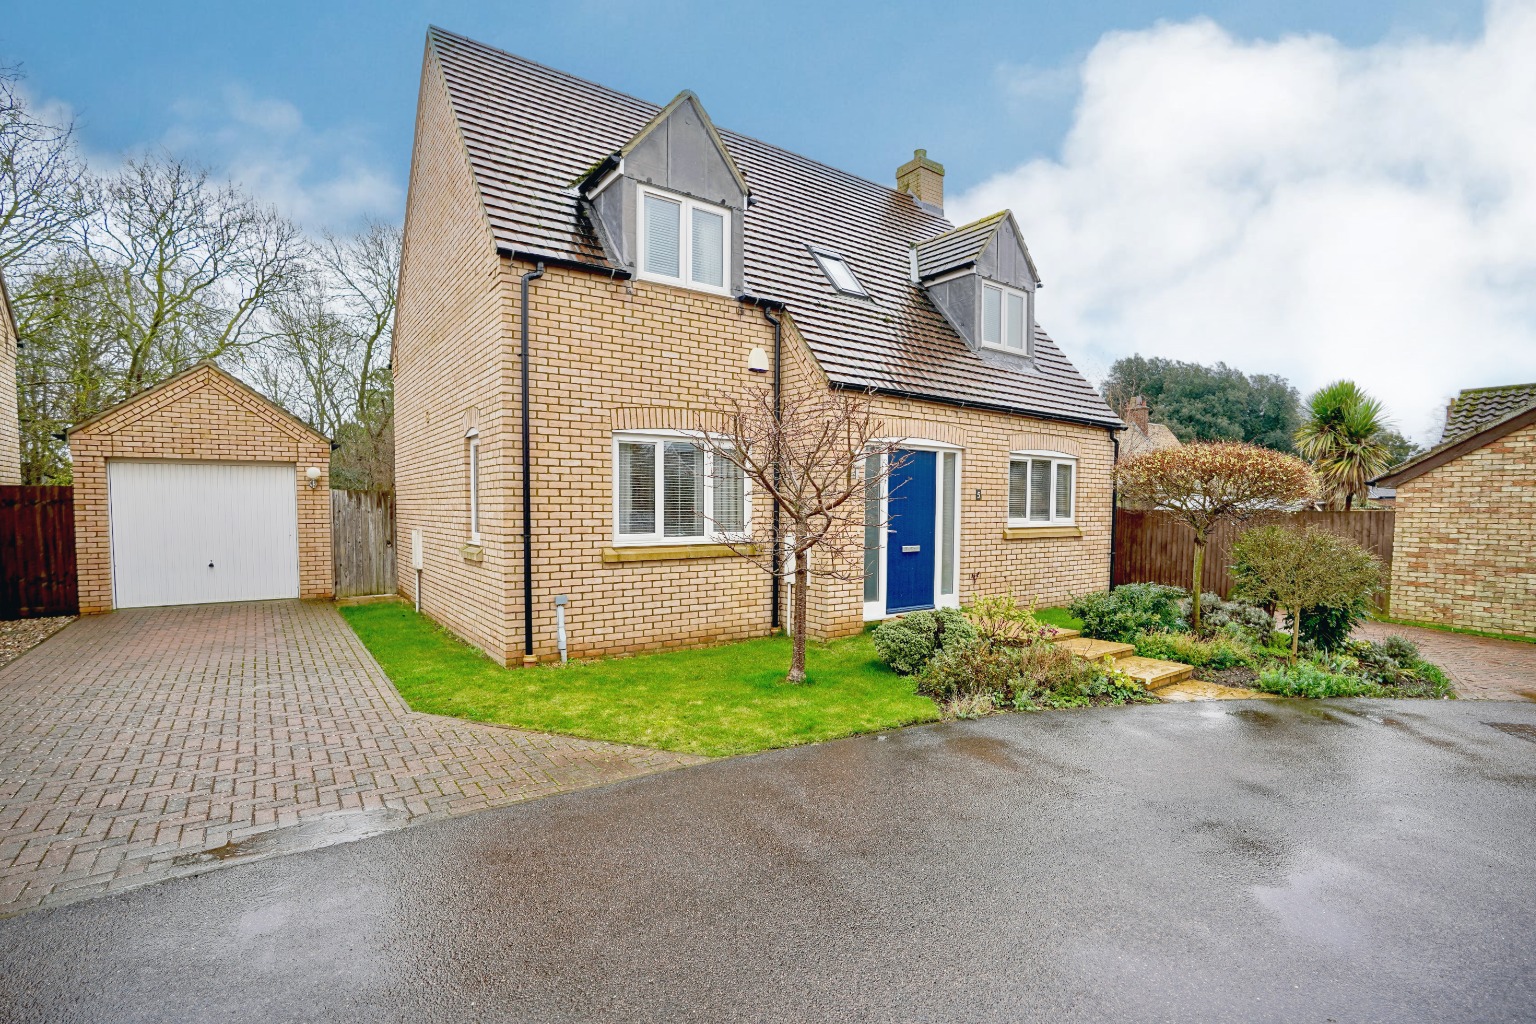 3 bed detached house for sale in Chapel Close, Huntingdon - Property Image 1